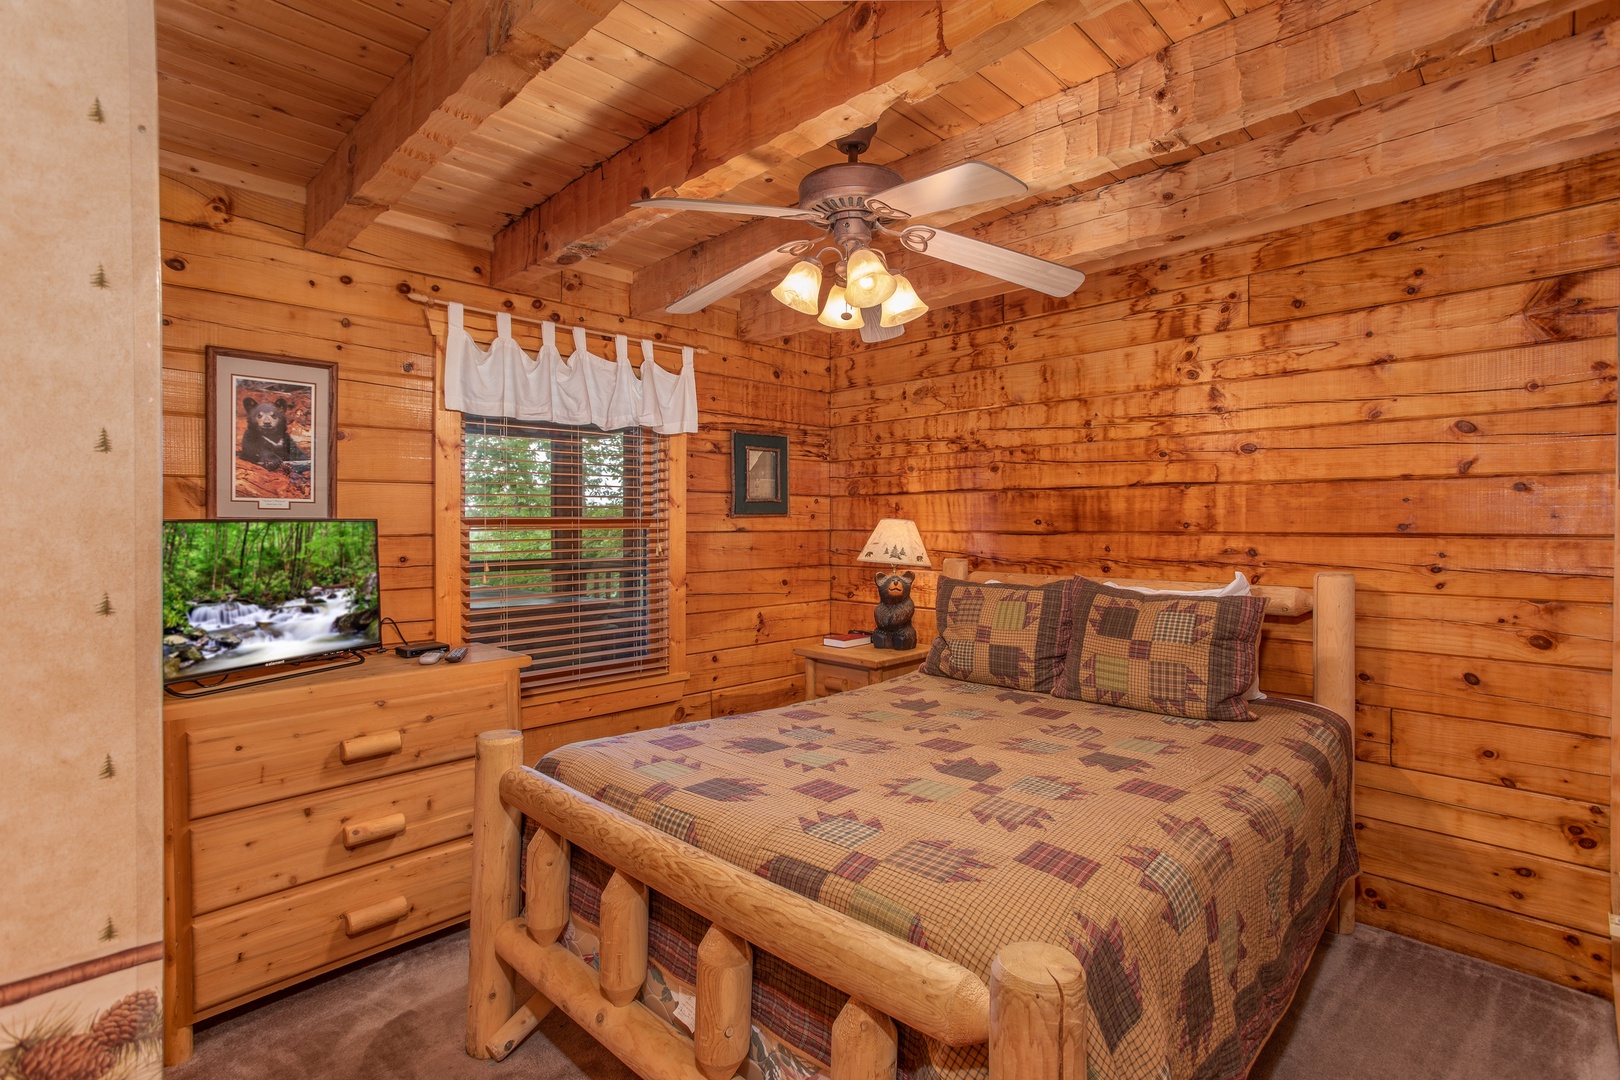 Log bed, dresser, and a television in a bedroom at Cabin in the Clouds, a 3-bedroom cabin rental located in Pigeon Forge